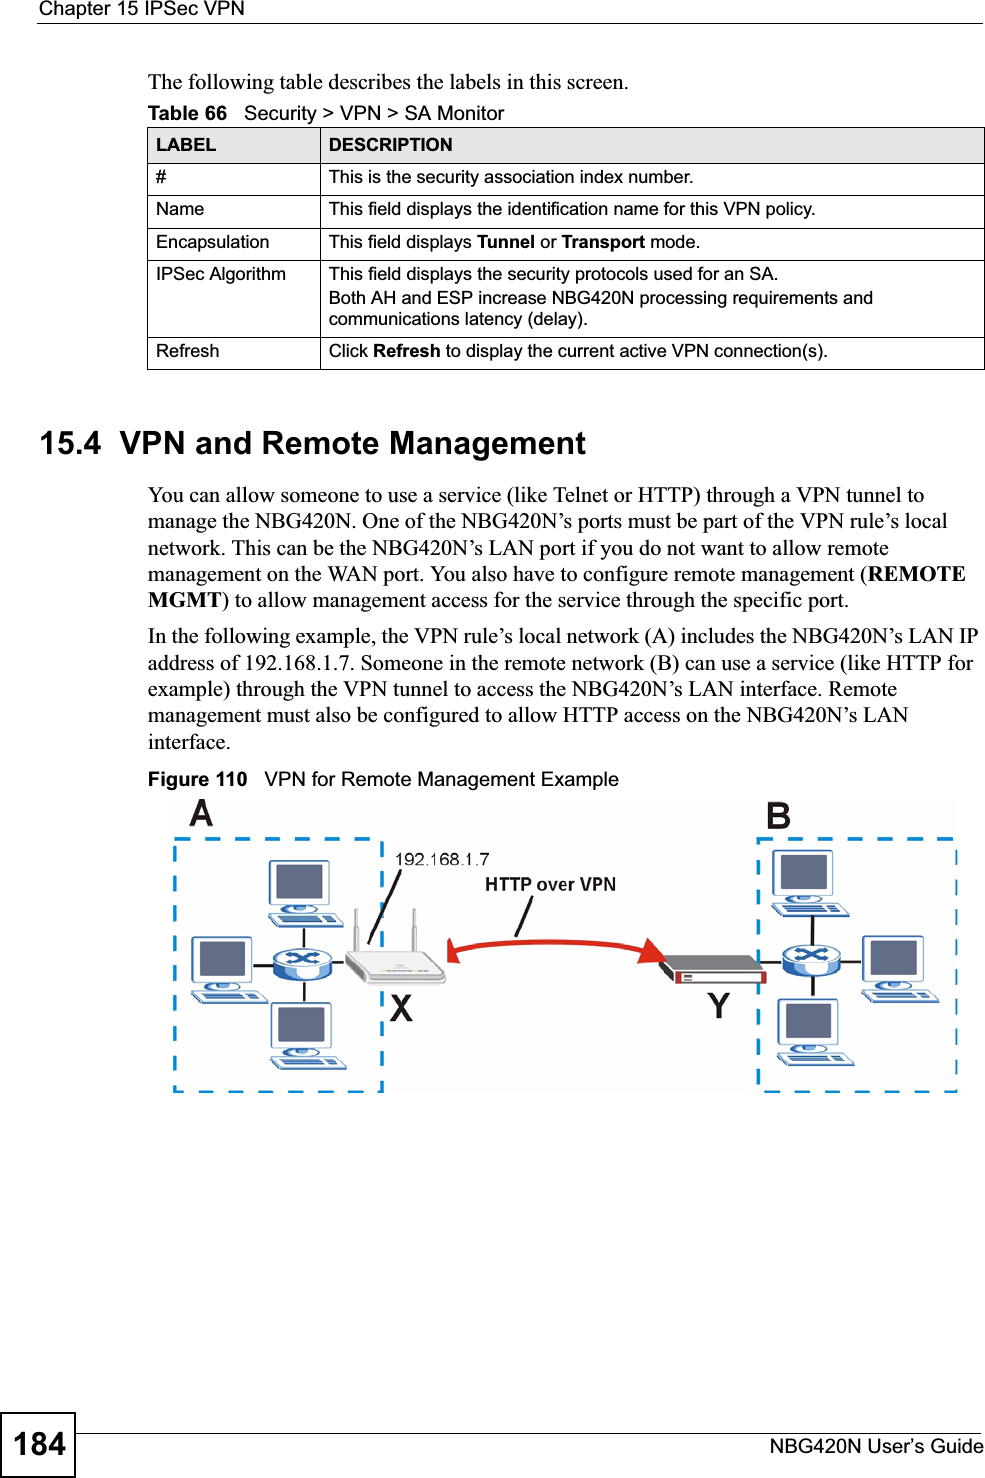 Chapter 15 IPSec VPNNBG420N User’s Guide184The following table describes the labels in this screen. 15.4  VPN and Remote ManagementYou can allow someone to use a service (like Telnet or HTTP) through a VPN tunnel to manage the NBG420N. One of the NBG420N’s ports must be part of the VPN rule’s local network. This can be the NBG420N’s LAN port if you do not want to allow remote management on the WAN port. You also have to configure remote management (REMOTEMGMT) to allow management access for the service through the specific port. In the following example, the VPN rule’s local network (A) includes the NBG420N’s LAN IP address of 192.168.1.7. Someone in the remote network (B) can use a service (like HTTP for example) through the VPN tunnel to access the NBG420N’s LAN interface. Remote management must also be configured to allow HTTP access on the NBG420N’s LAN interface.Figure 110   VPN for Remote Management ExampleTable 66   Security &gt; VPN &gt; SA MonitorLABEL DESCRIPTION# This is the security association index number. Name This field displays the identification name for this VPN policy.Encapsulation This field displays Tunnel or Transport mode. IPSec Algorithm This field displays the security protocols used for an SA.Both AH and ESP increase NBG420N processing requirements and communications latency (delay).Refresh Click Refresh to display the current active VPN connection(s). 